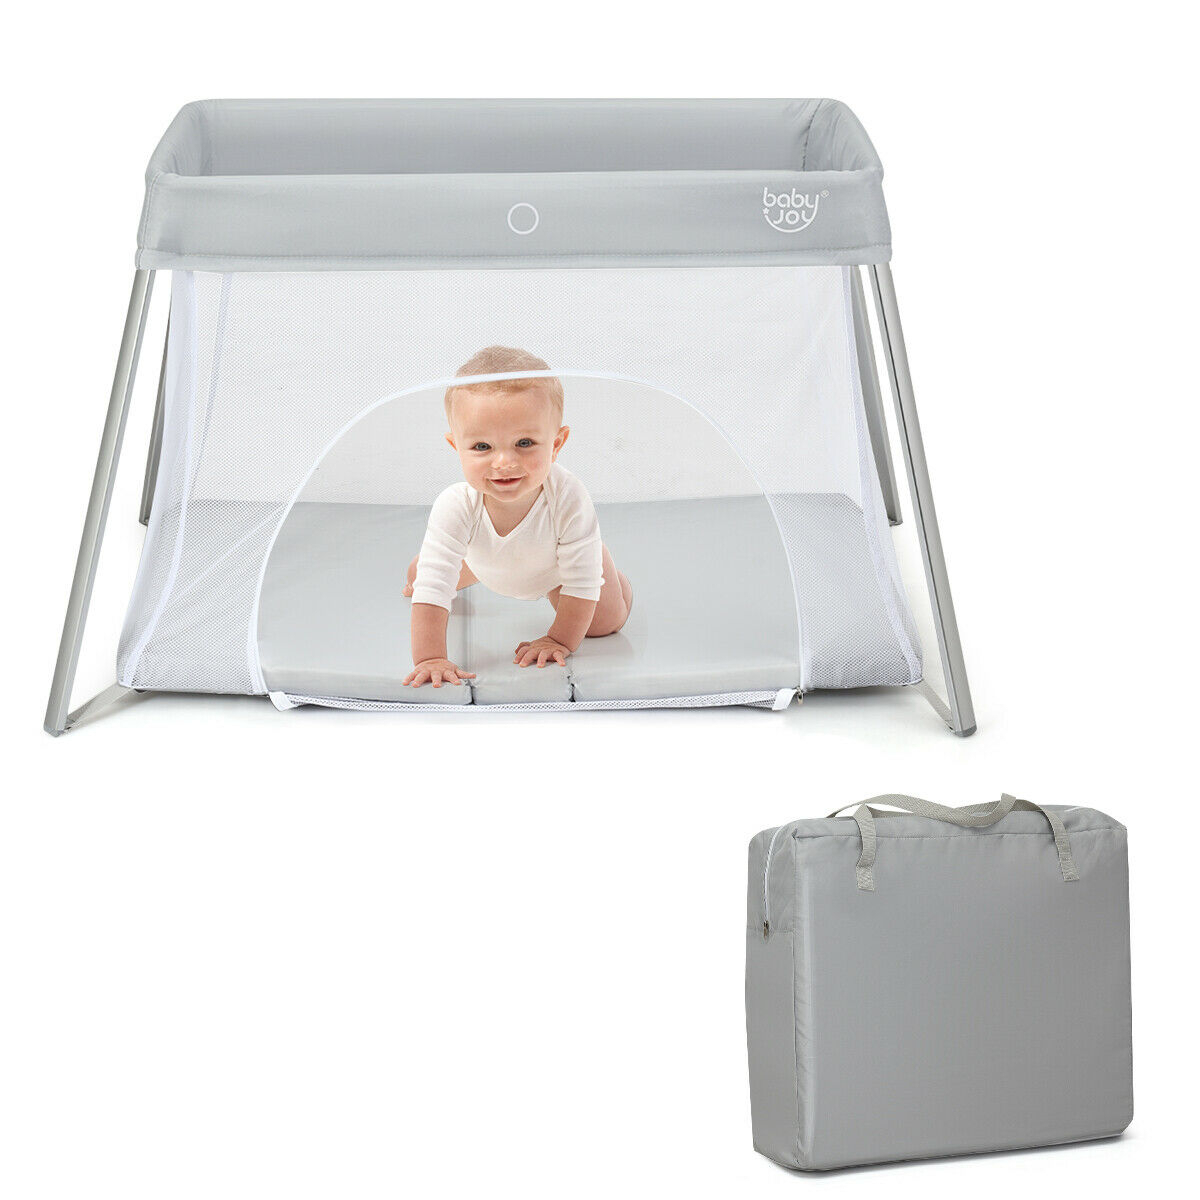 Foldable Baby Playpen Playard Lightweight Crib W/ Carry Bag For Infant Gray